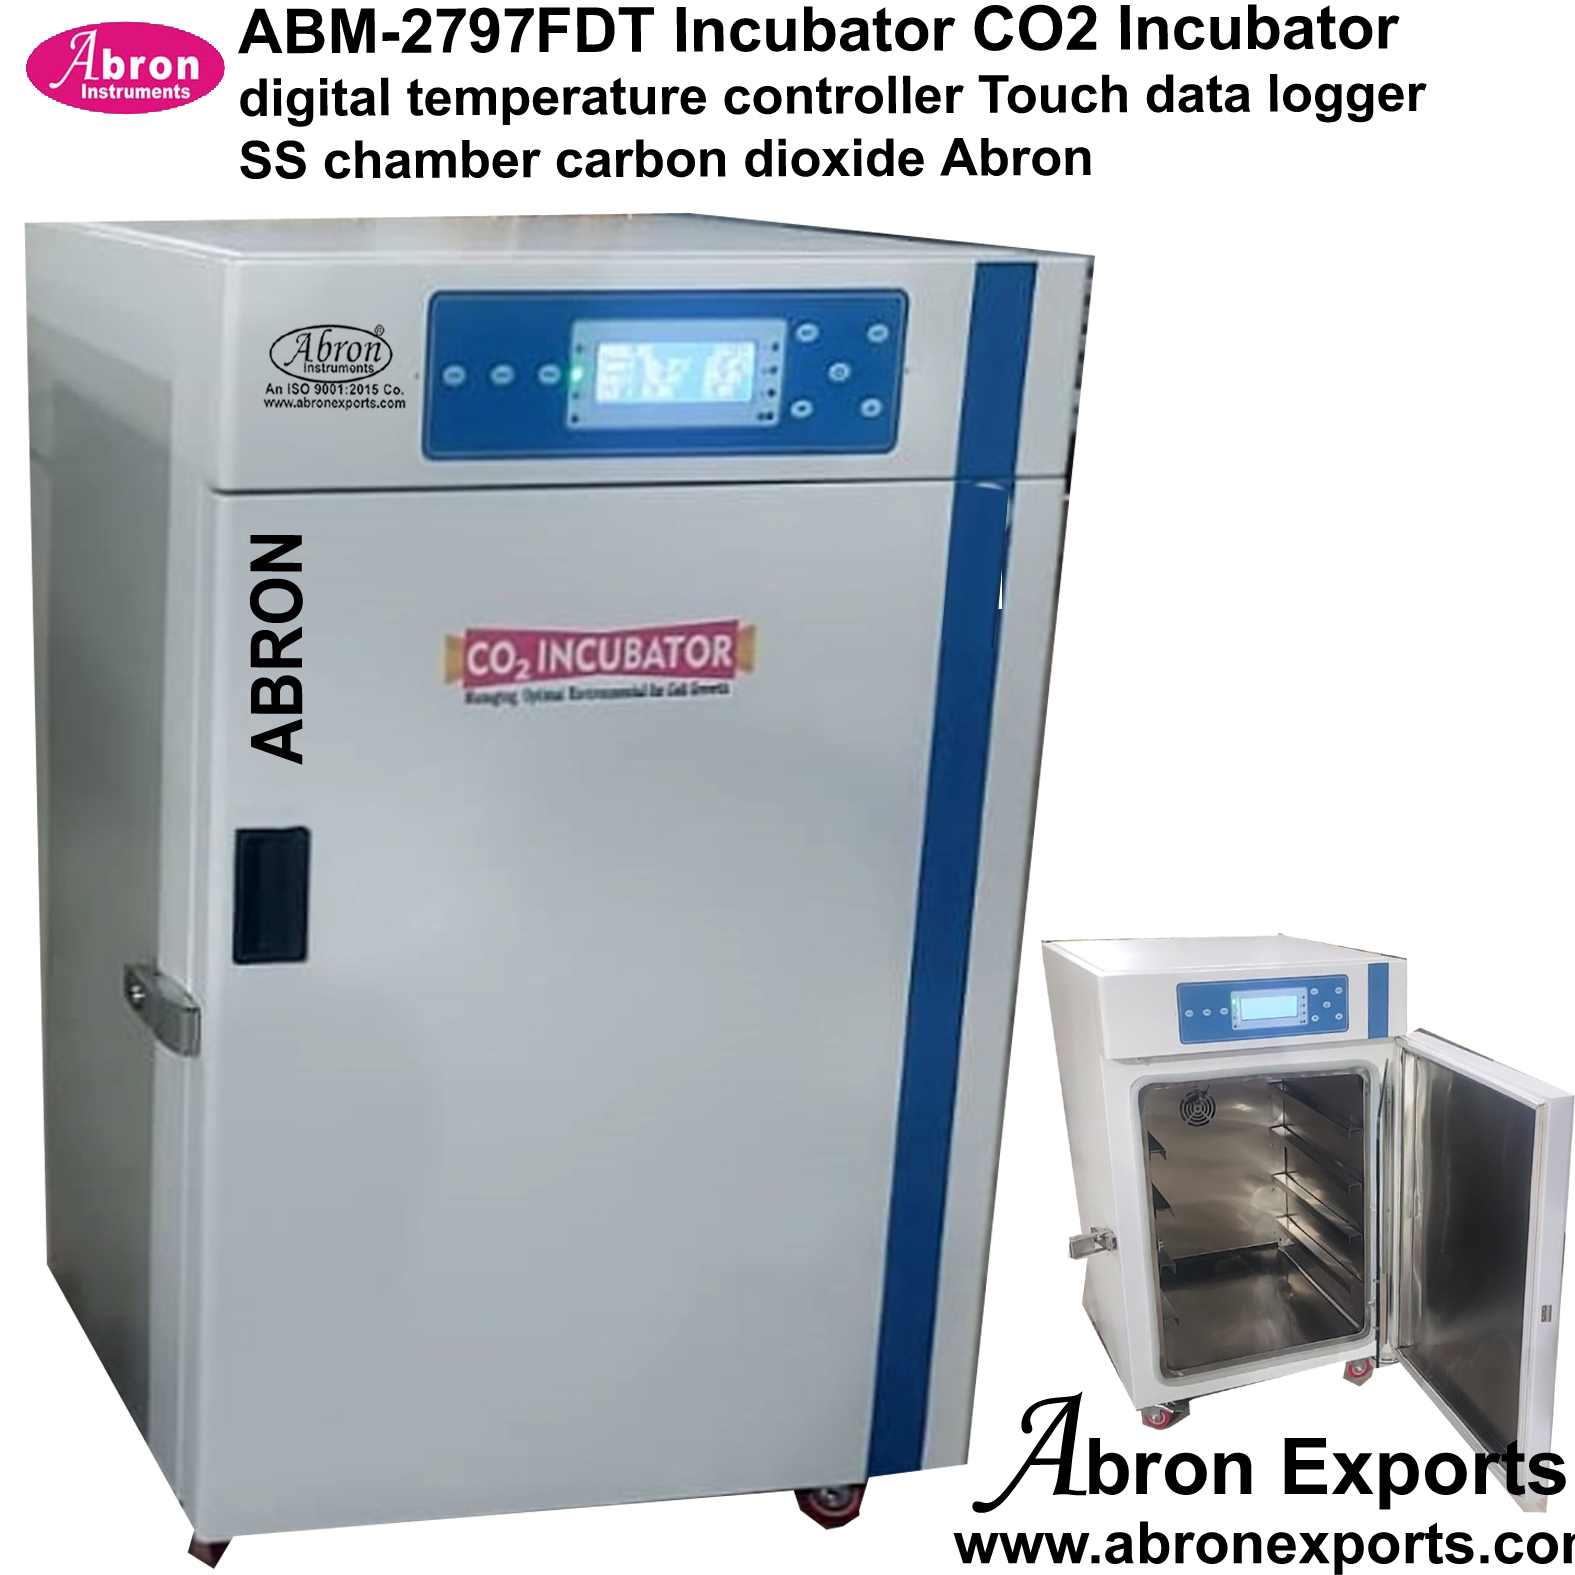 Incubator CO2 Incubator digital temperature controller Touch data logger SS chamber carbon dioxide Abron ABM-2797DT 